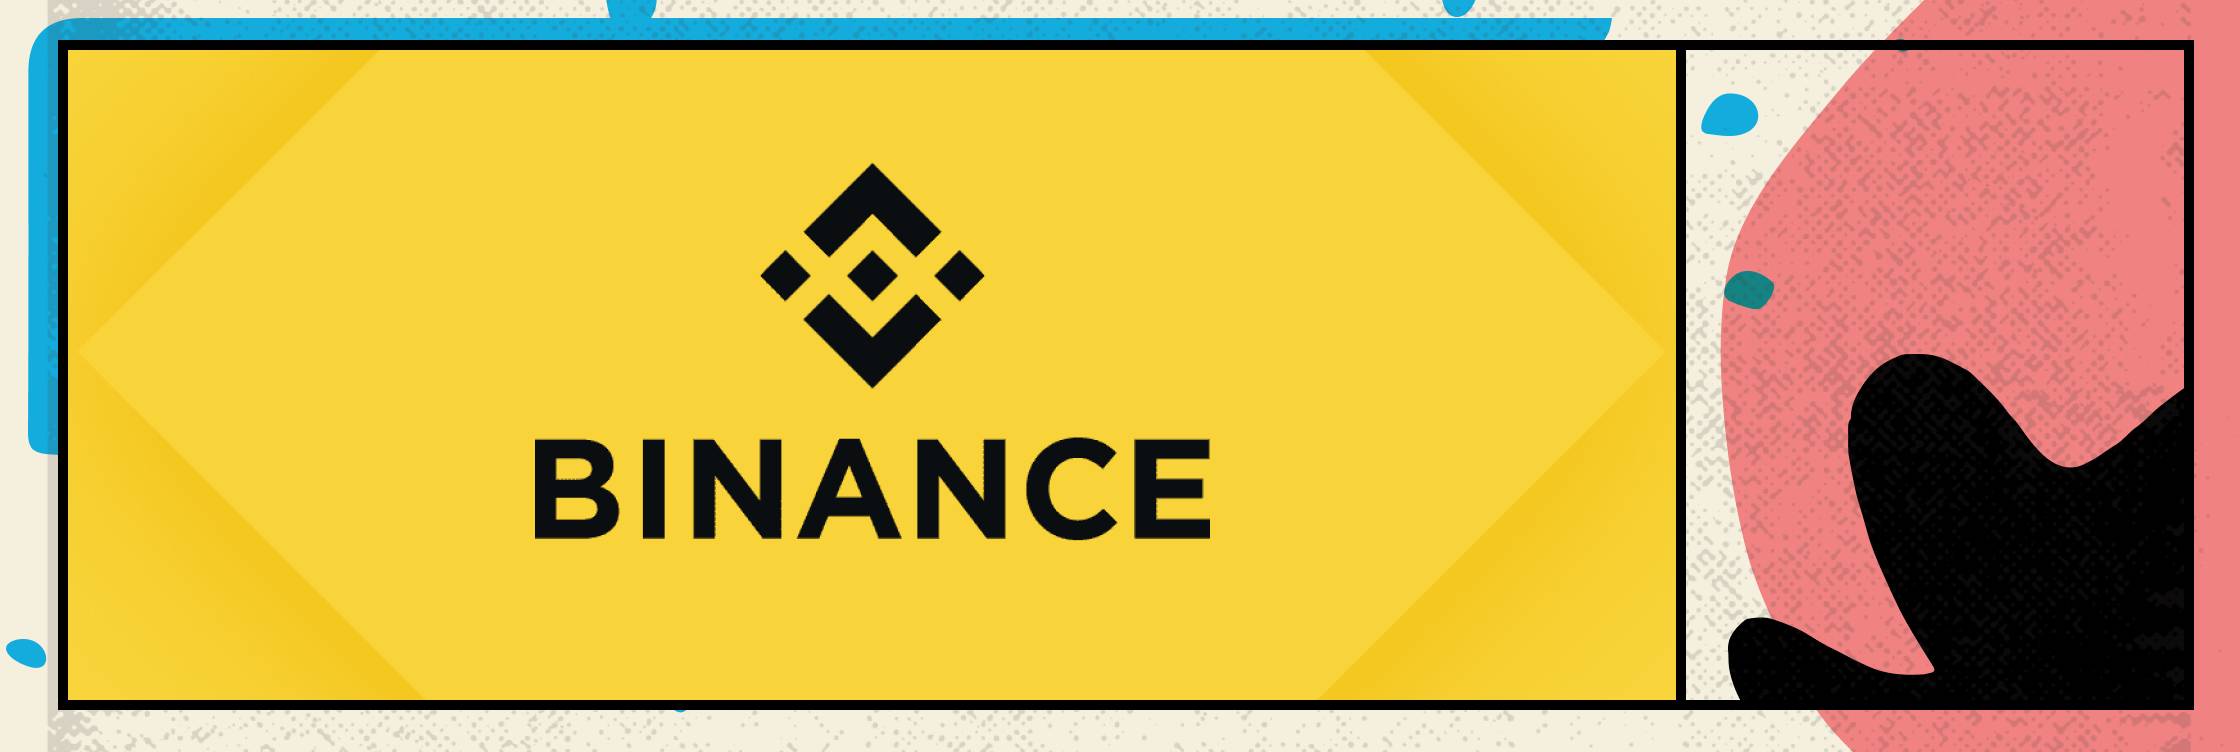 Over 50 Scam Projects Revealed on Binance